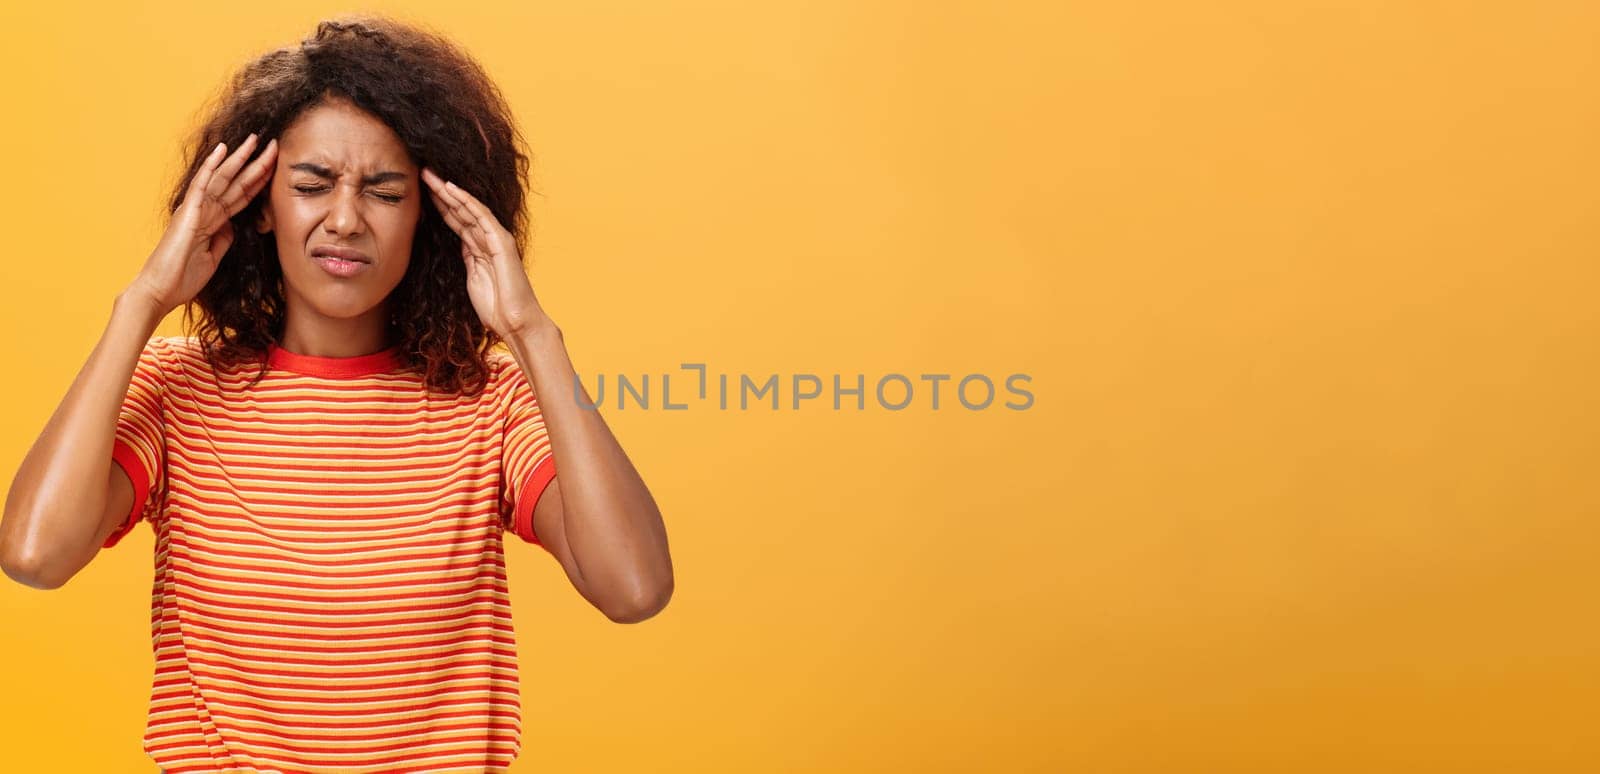 Woman cannot recall important information looking intense trying concetrate under pressure feeling tensed touching temples closing eyes while thinking hard posing against orange background.